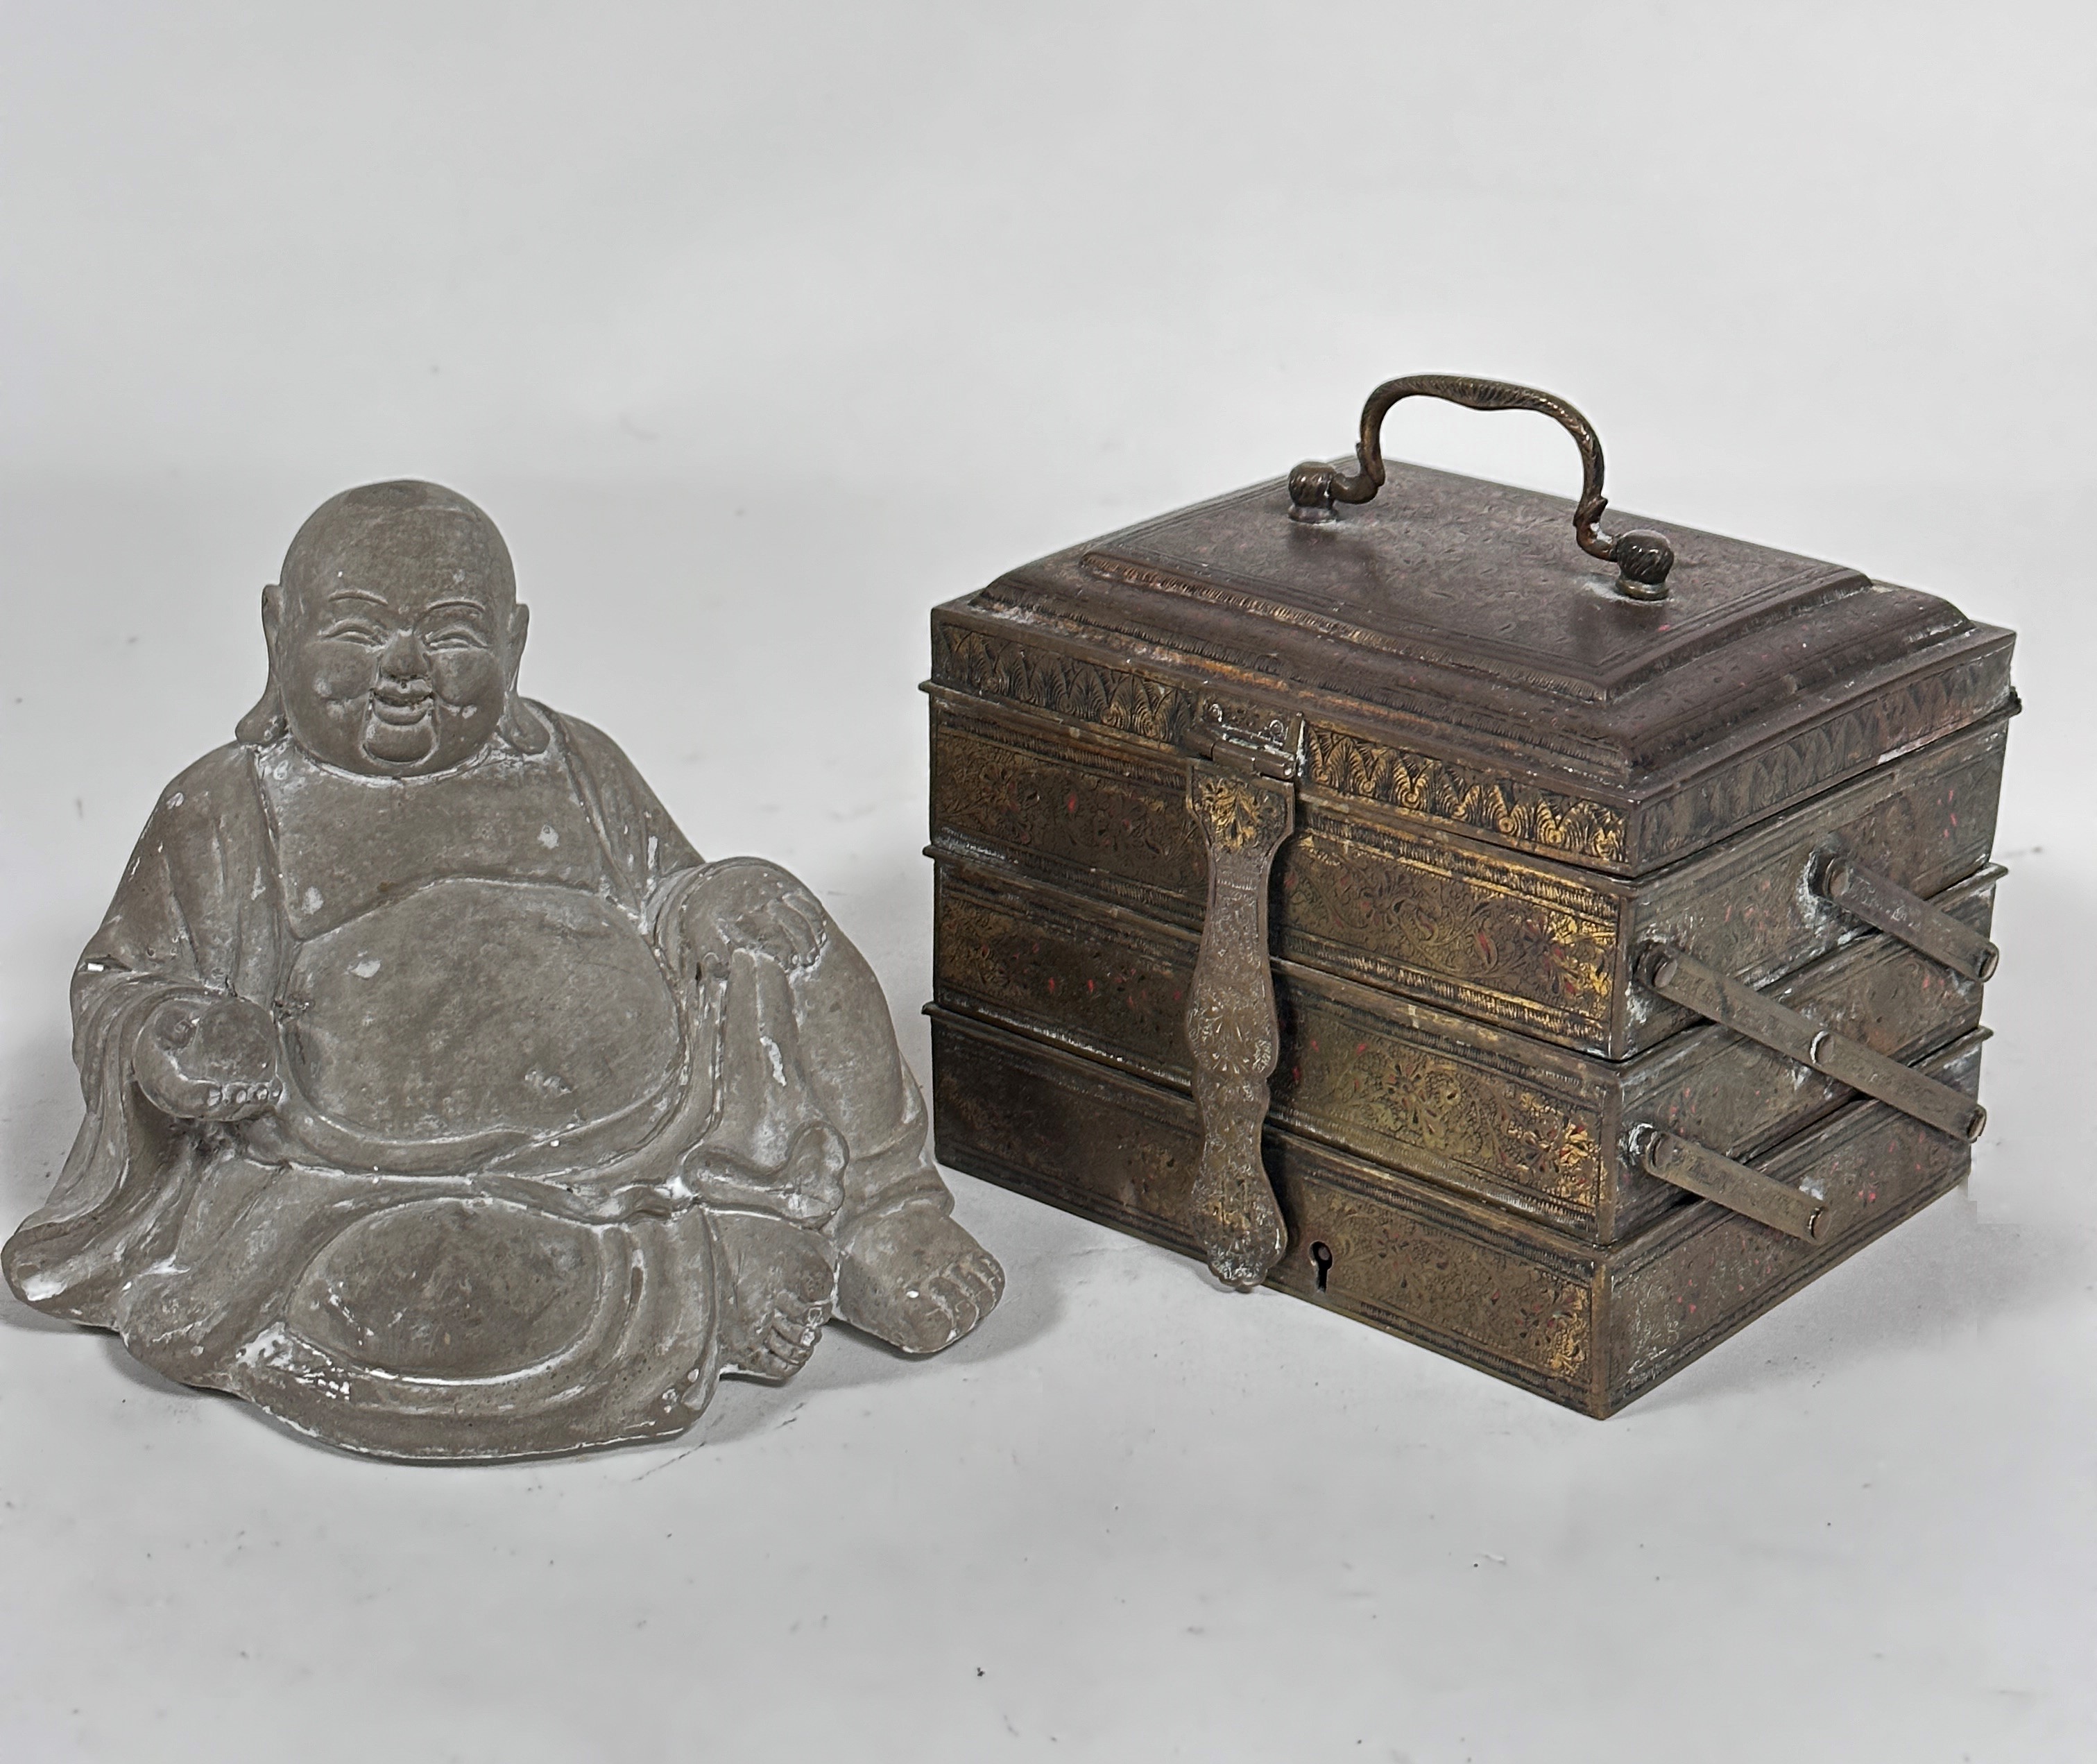 A plaster cast seated Happy Buddha figure with grey painted finish (14cm x 14cm) and a Middle